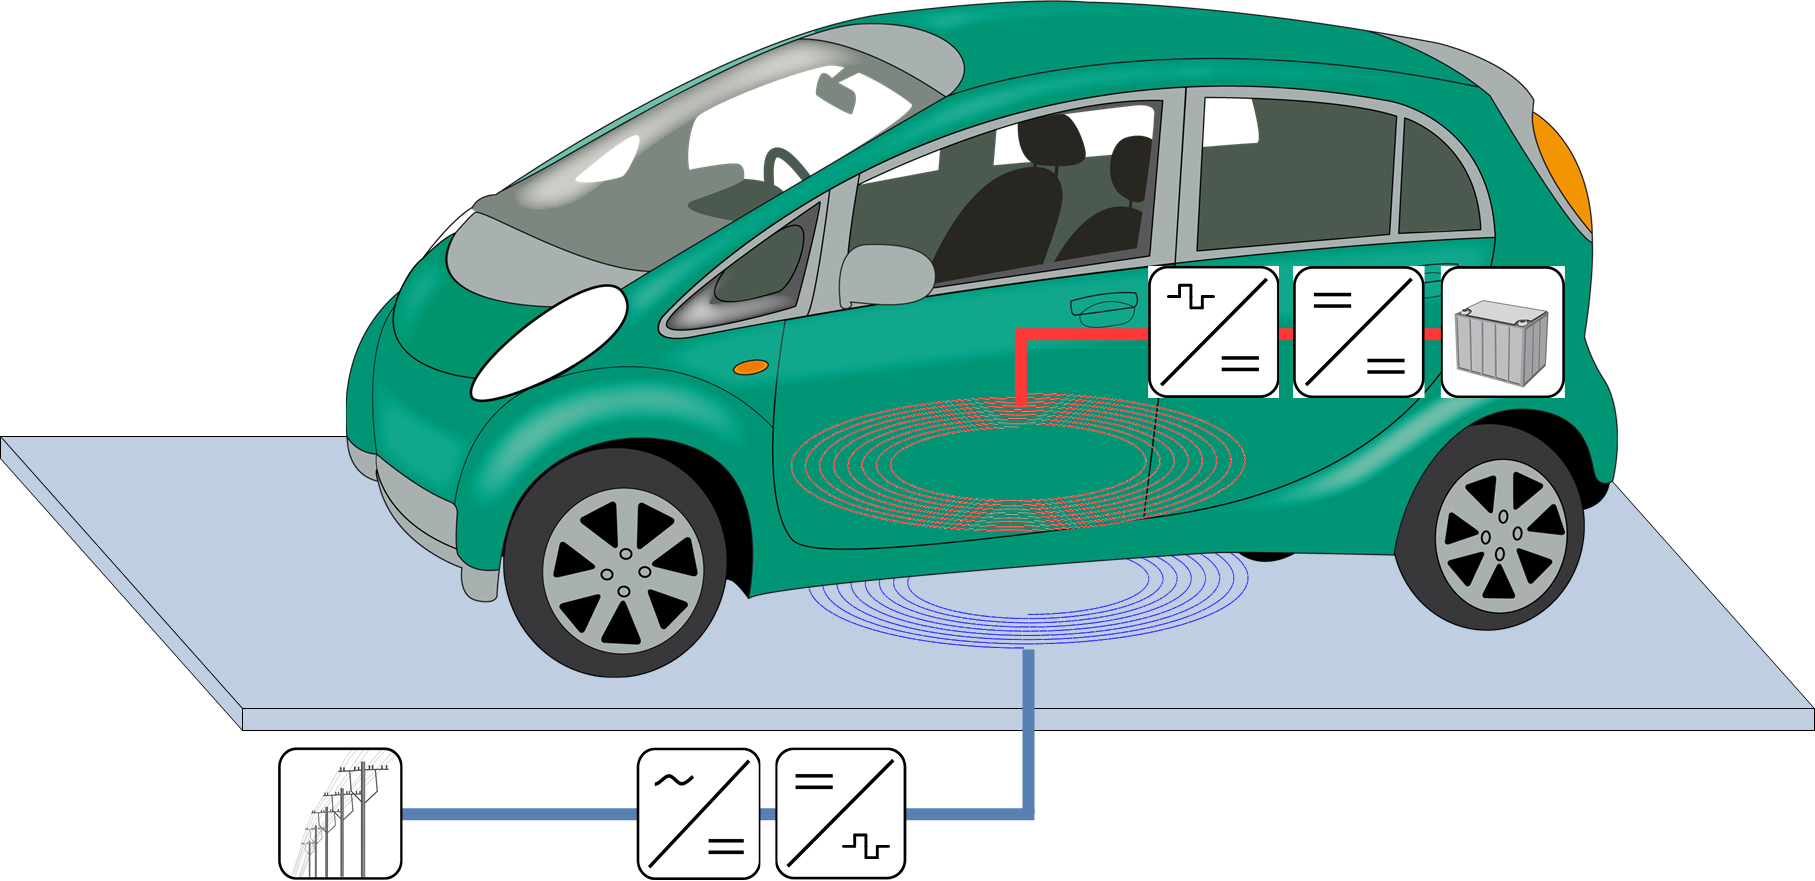 Graphics: Schematic of an inductive charging system with power converters 